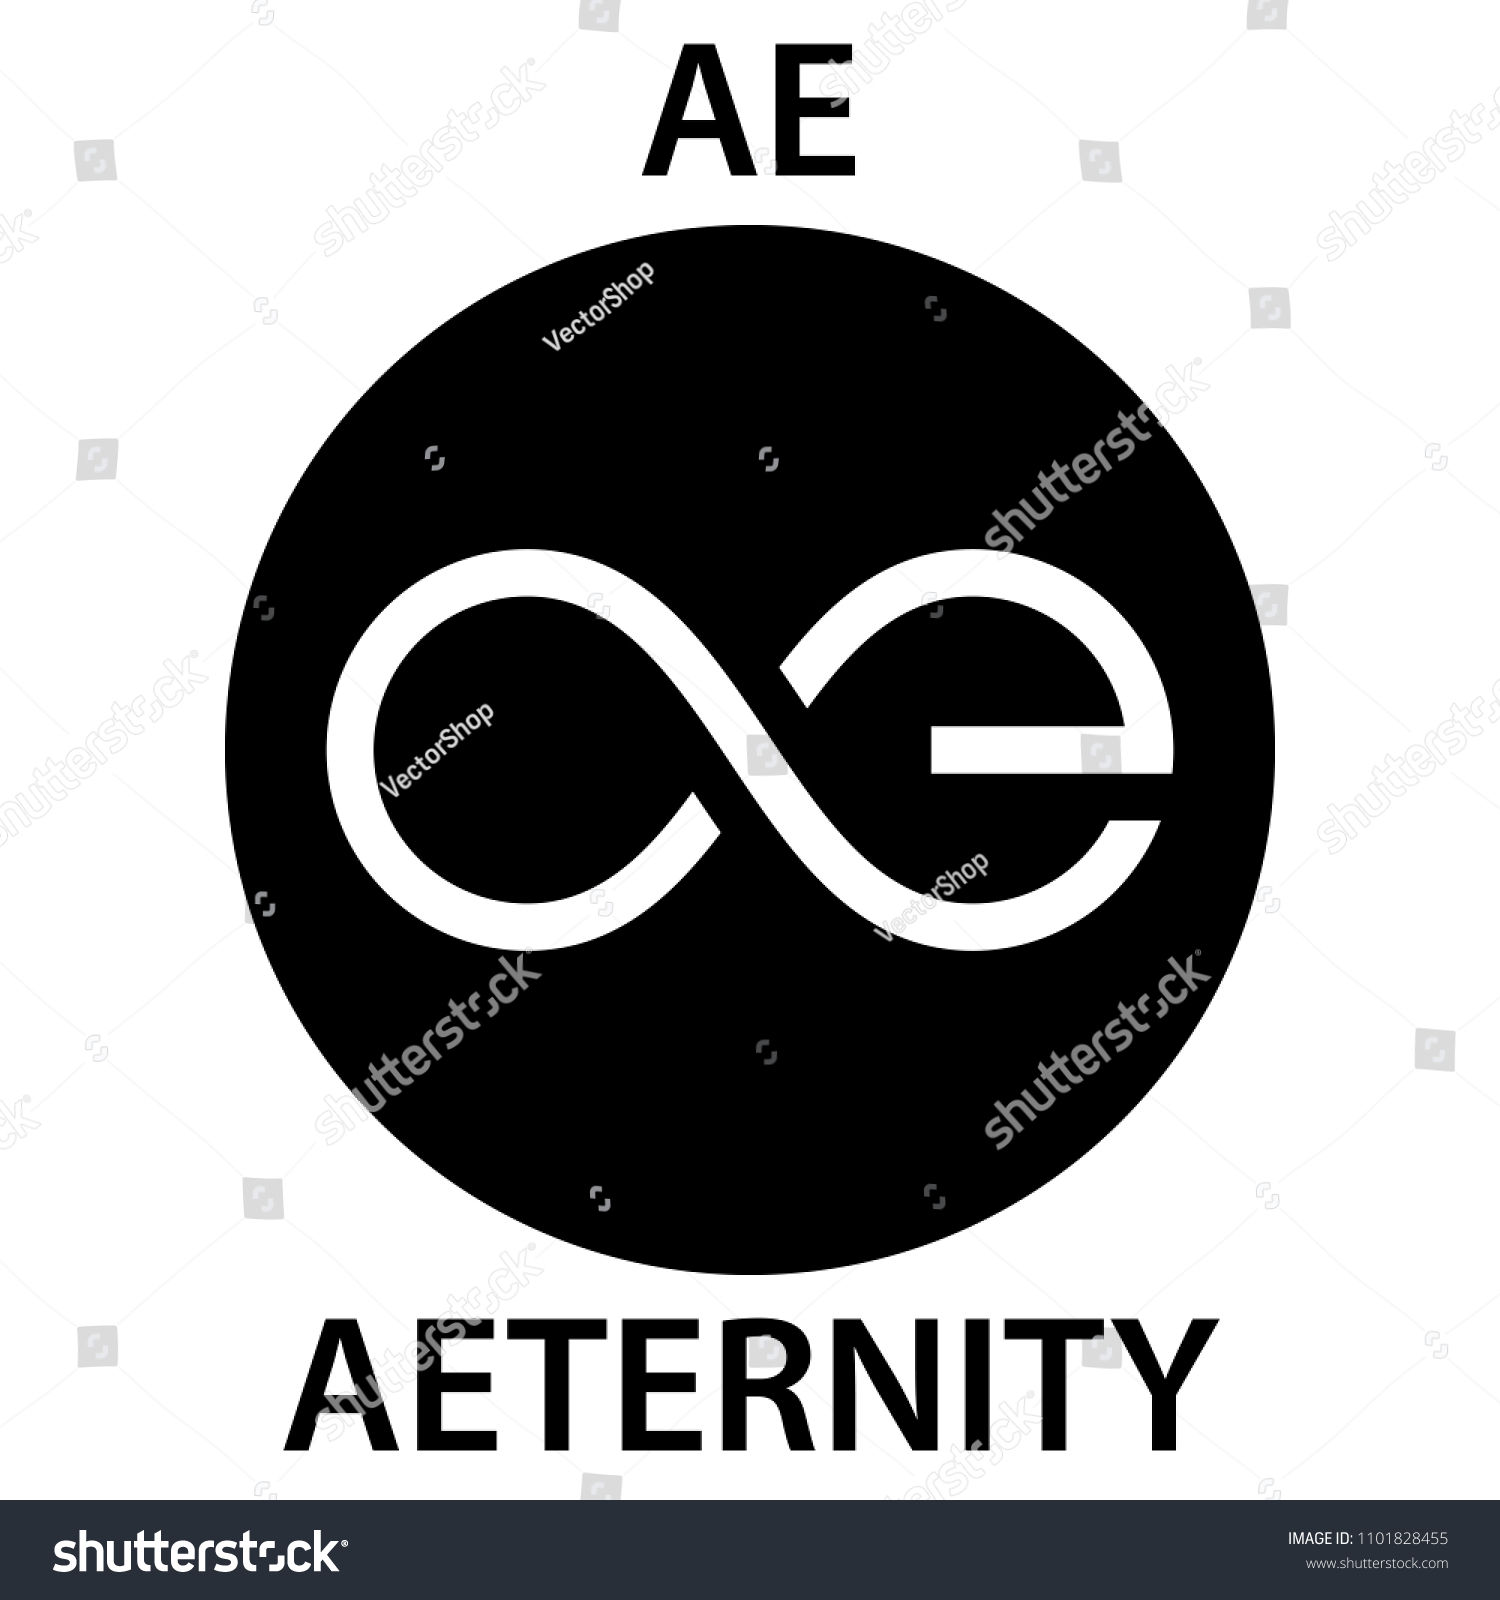 Eternity Chain Crypto Where To Buy - What Is Ethernity ...